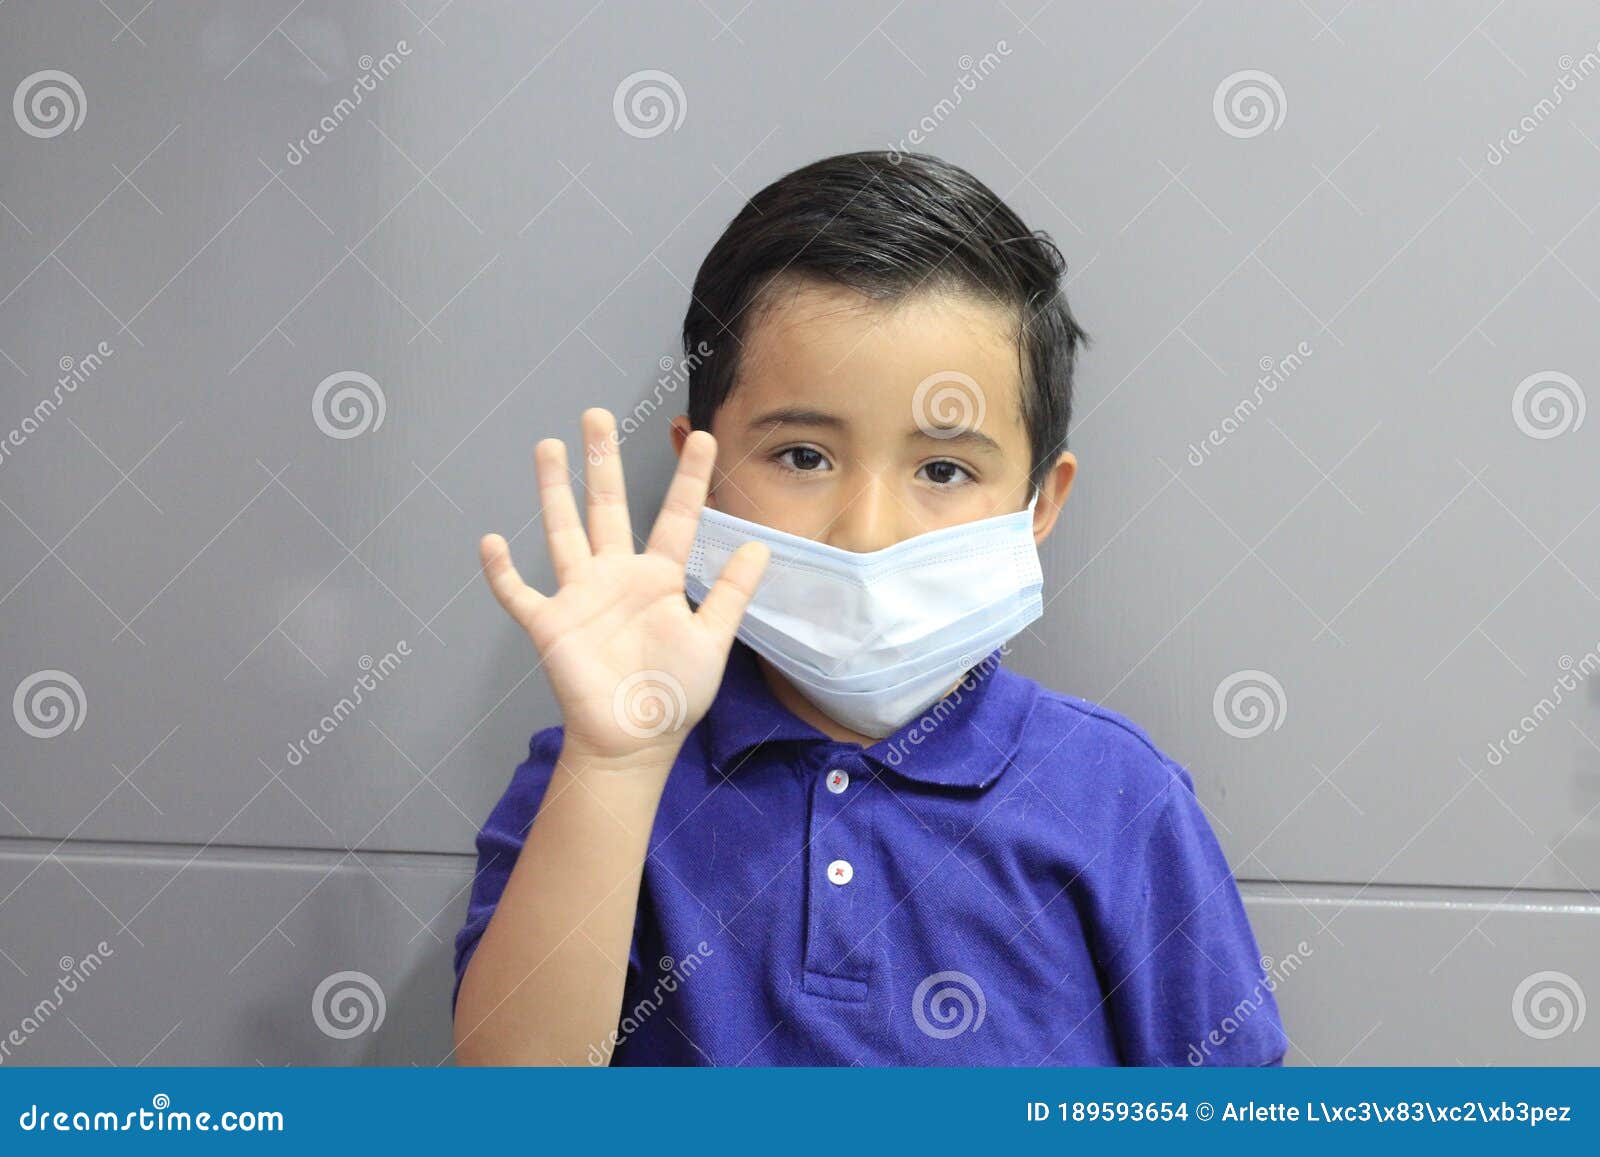 6-year-old latino boy with covid-19 prevention mask